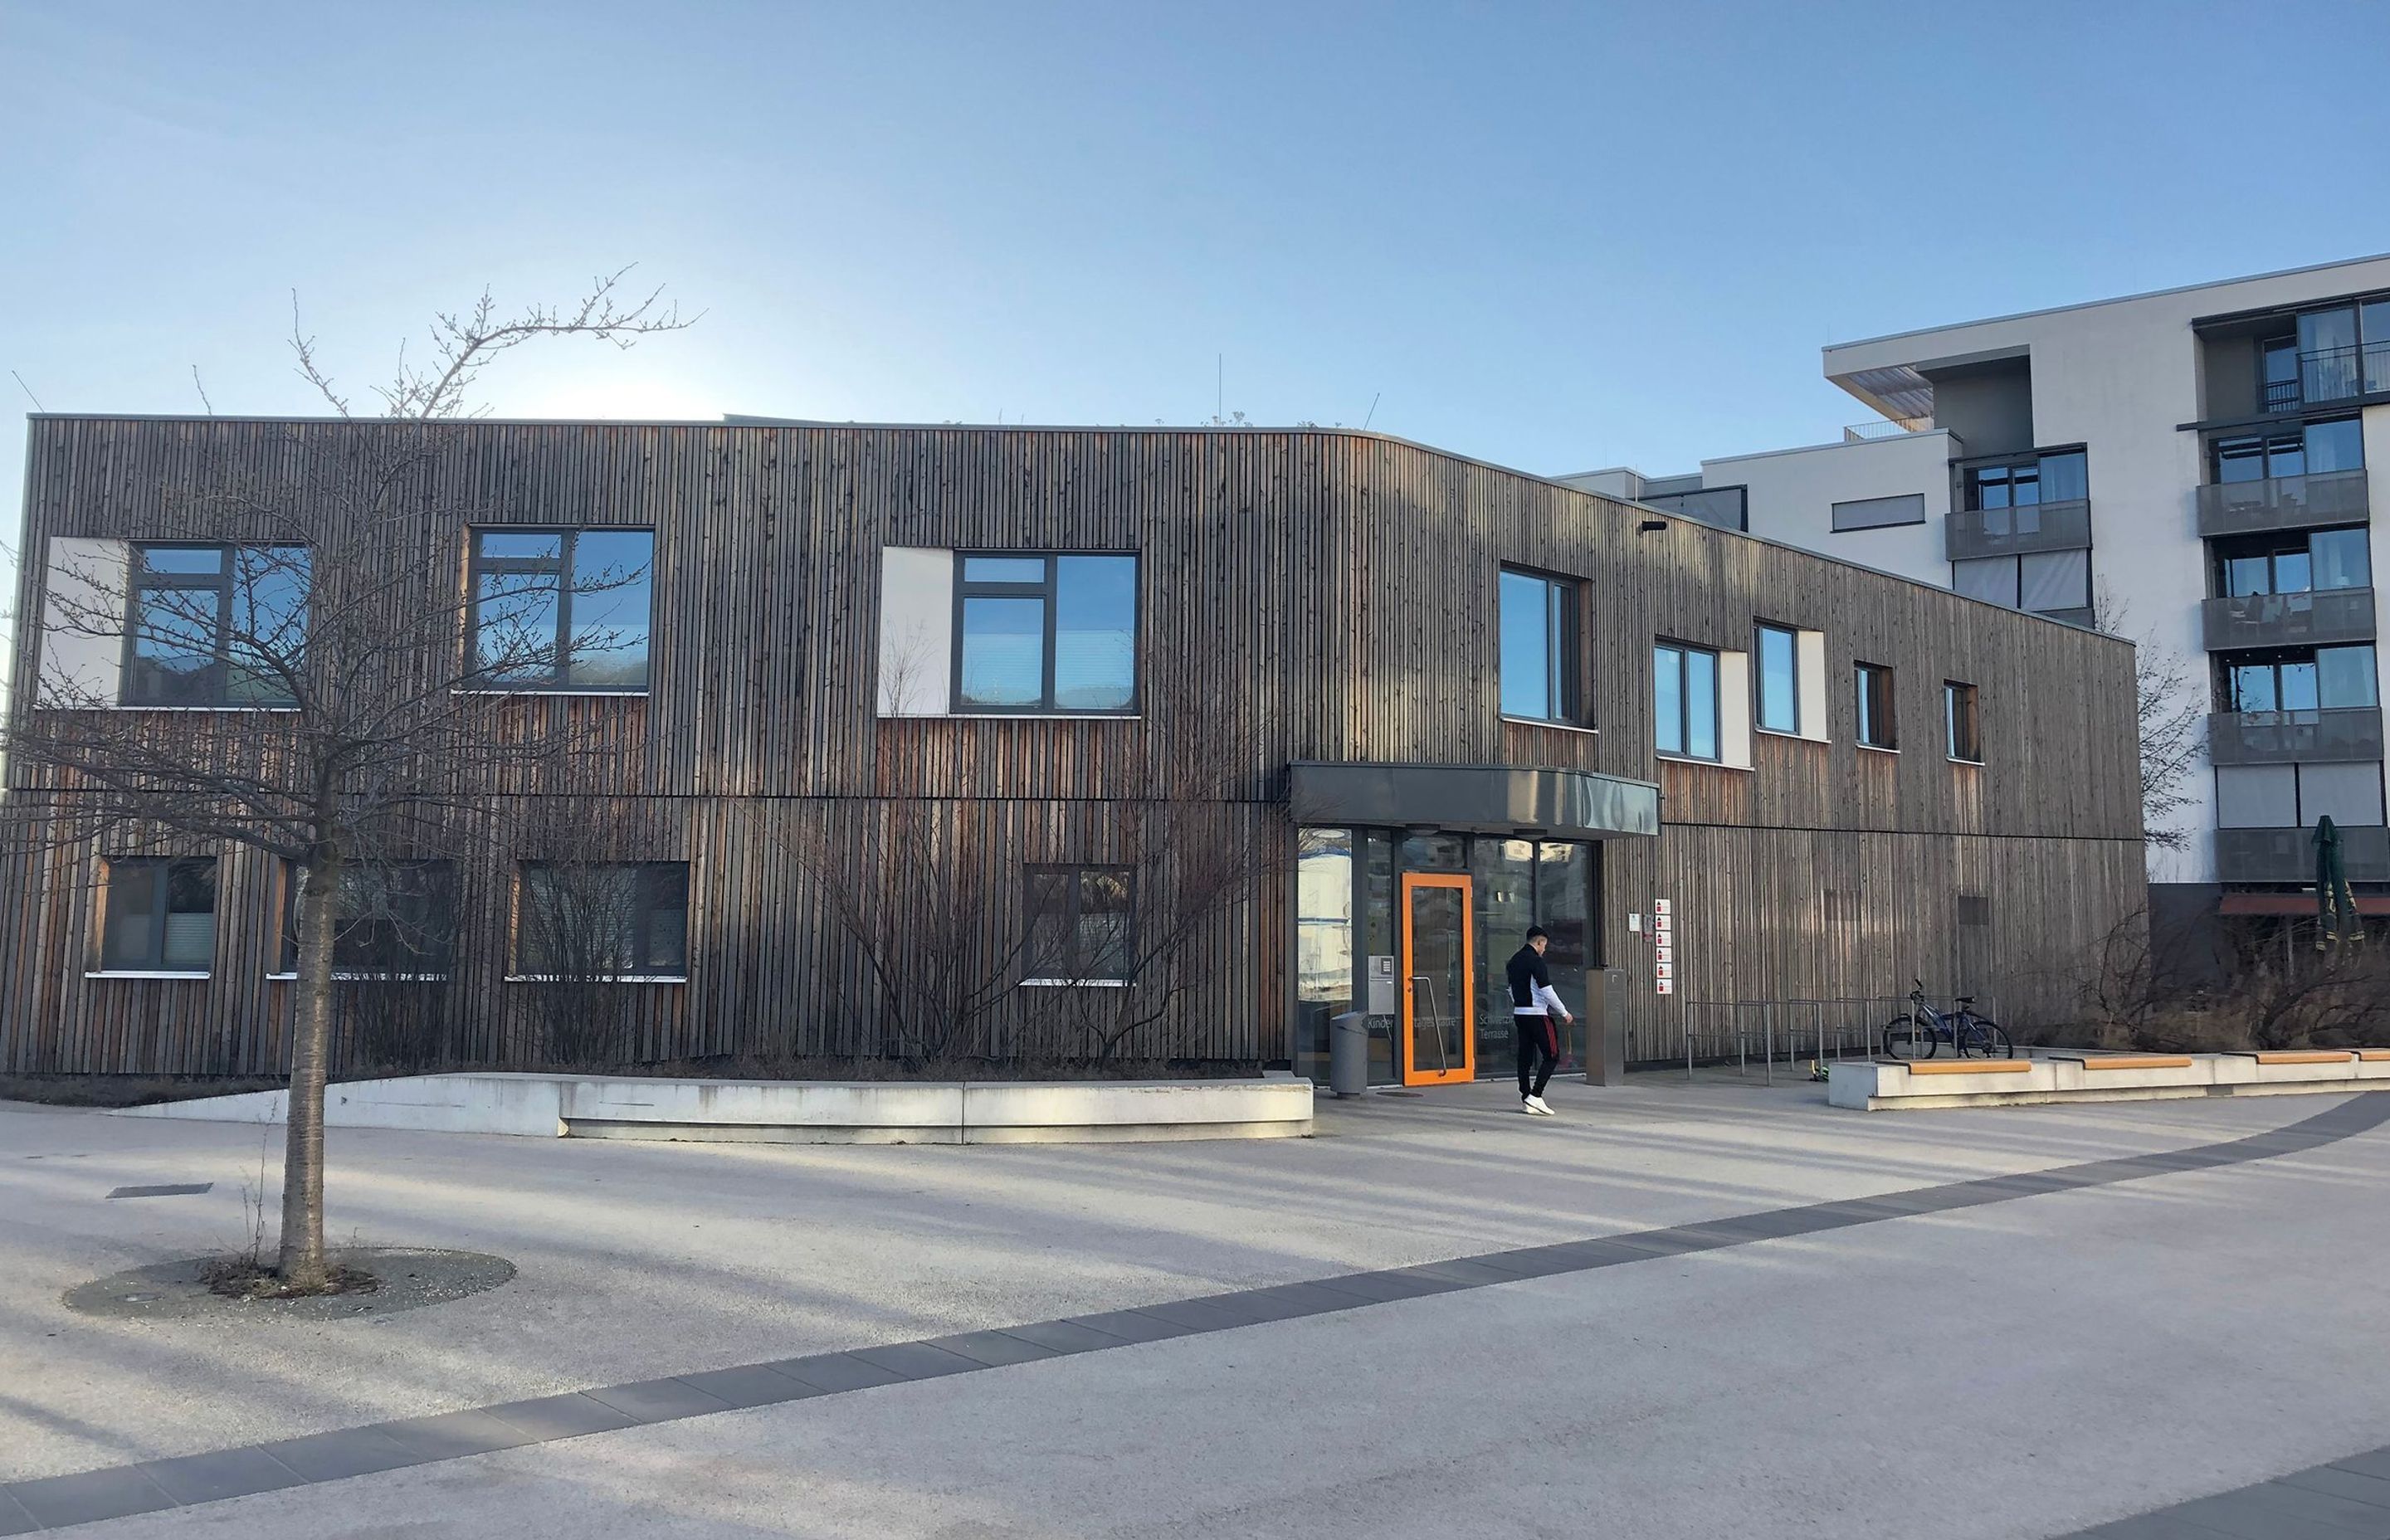 A timber-clad nursery school in the Barnstadt urban development in Heidelberg, Germany, which includes apartments, cafes, schools, offices all constructed to ‘passive house’ standard.                                                                   